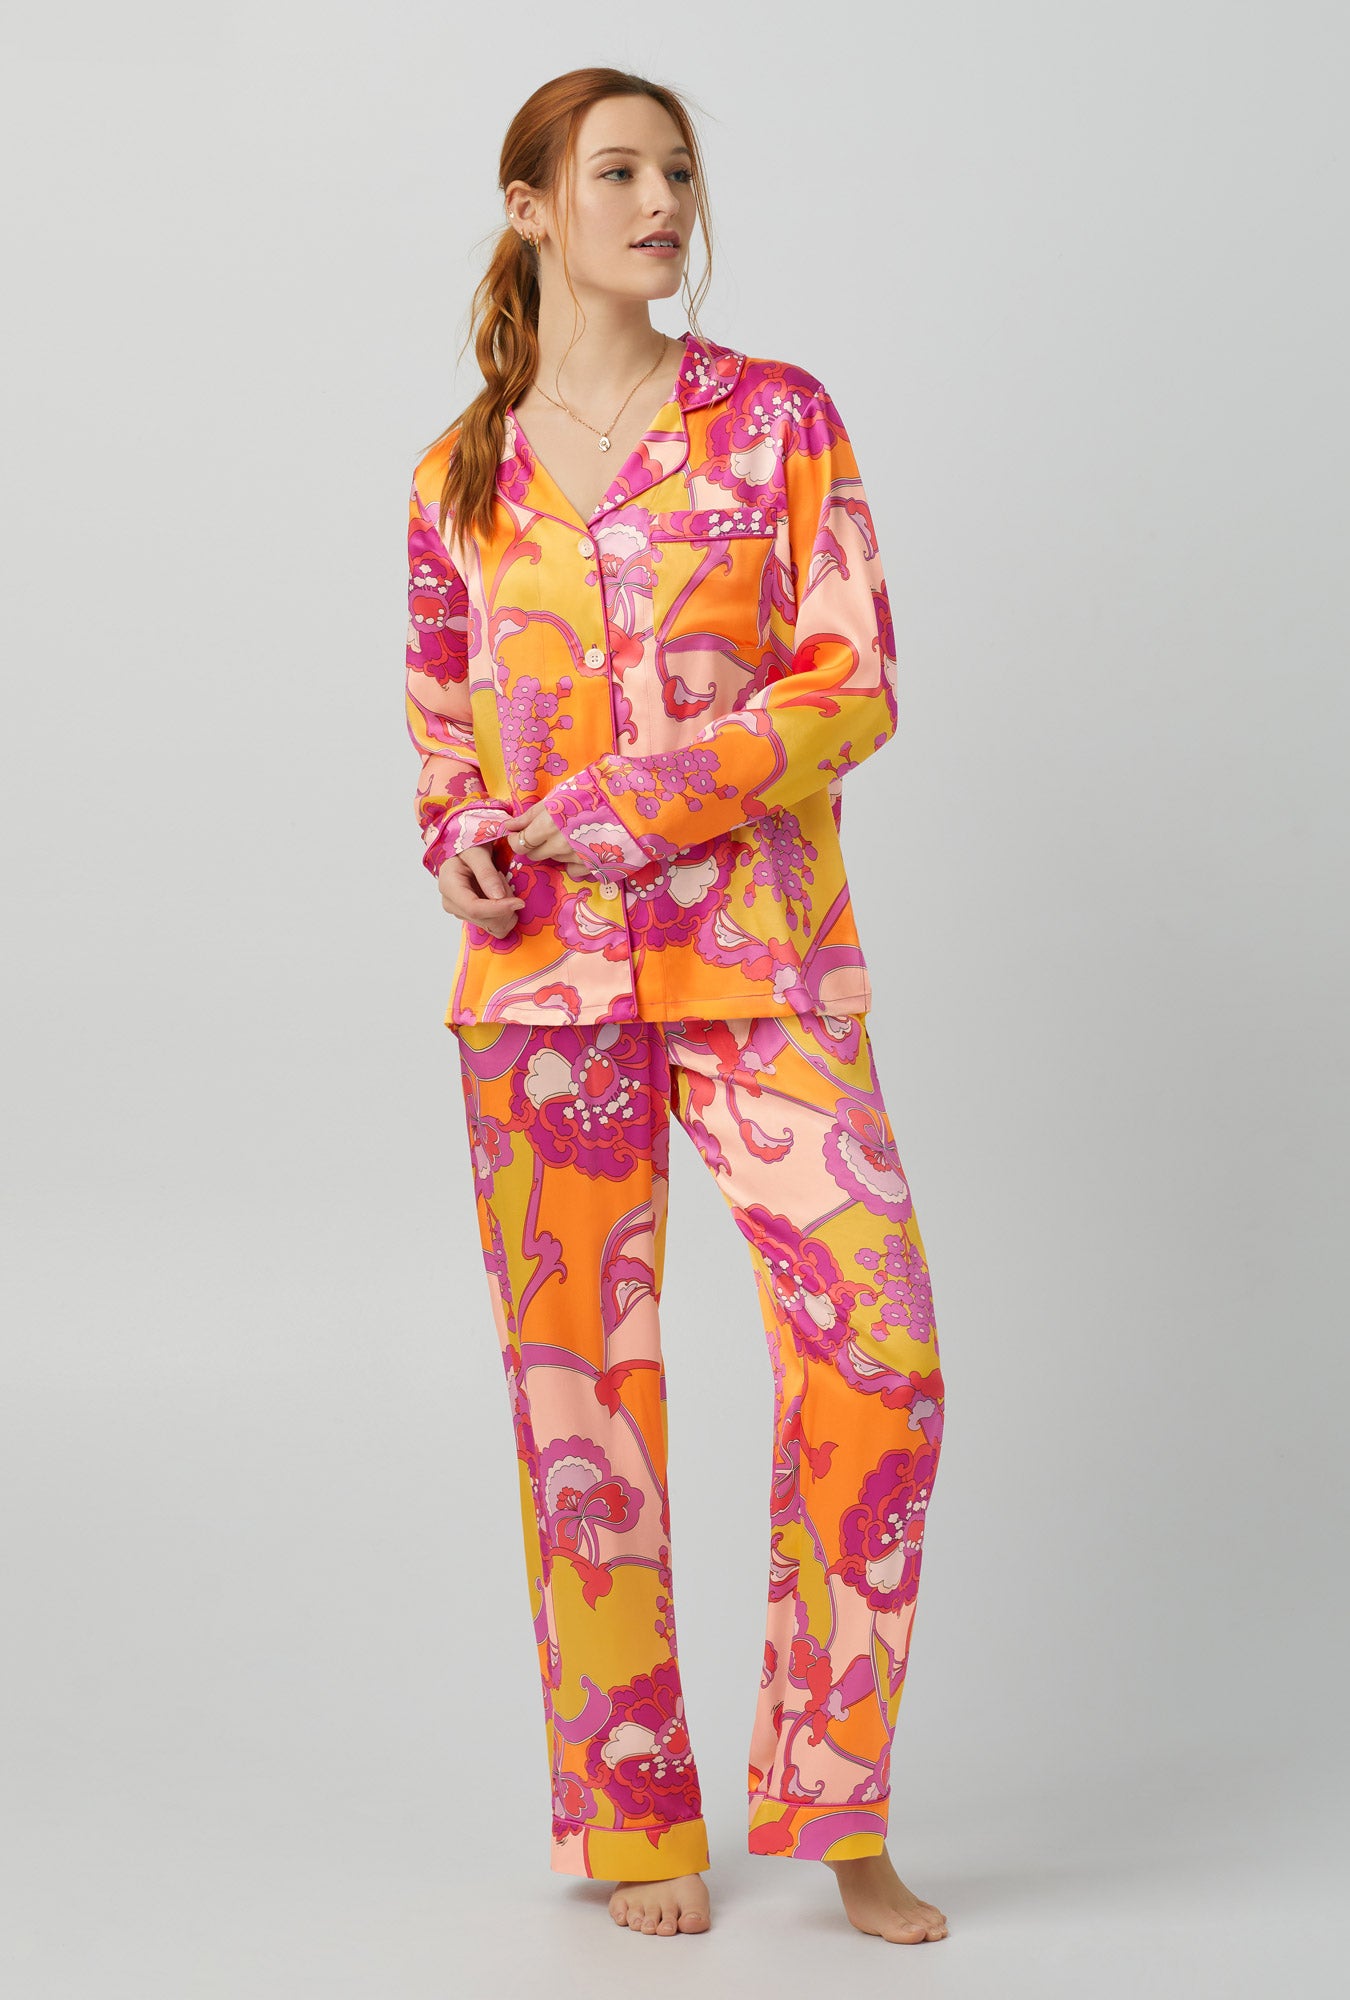 A lady wearing Long Sleeve Classic Washable Silk PJ Set with apache bloom print